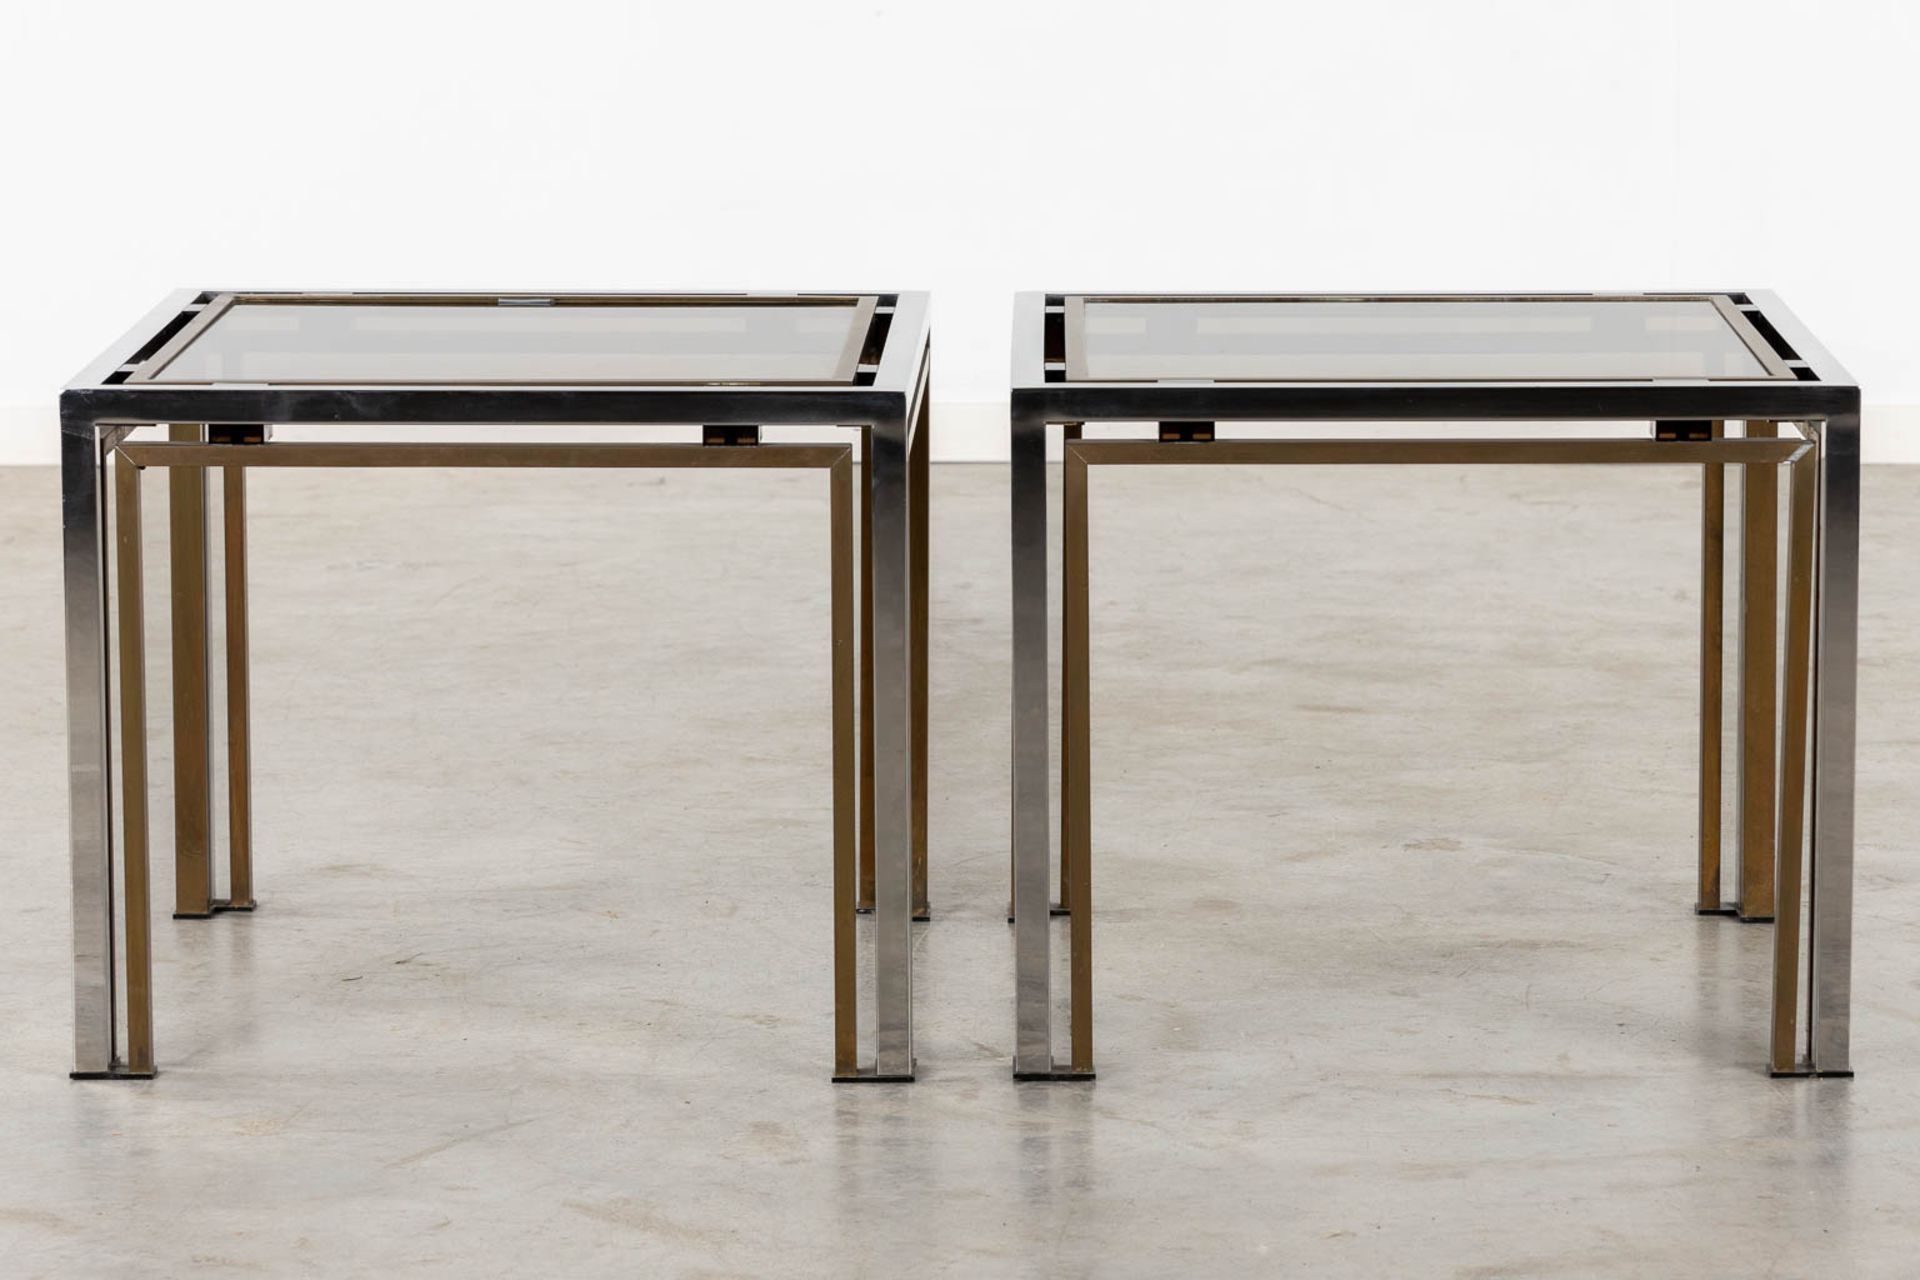 Four identical tables, brass and glass. Dewulf Selection / Belgo Chrome. (L:60 x W:60 x H:50 cm) - Image 5 of 12